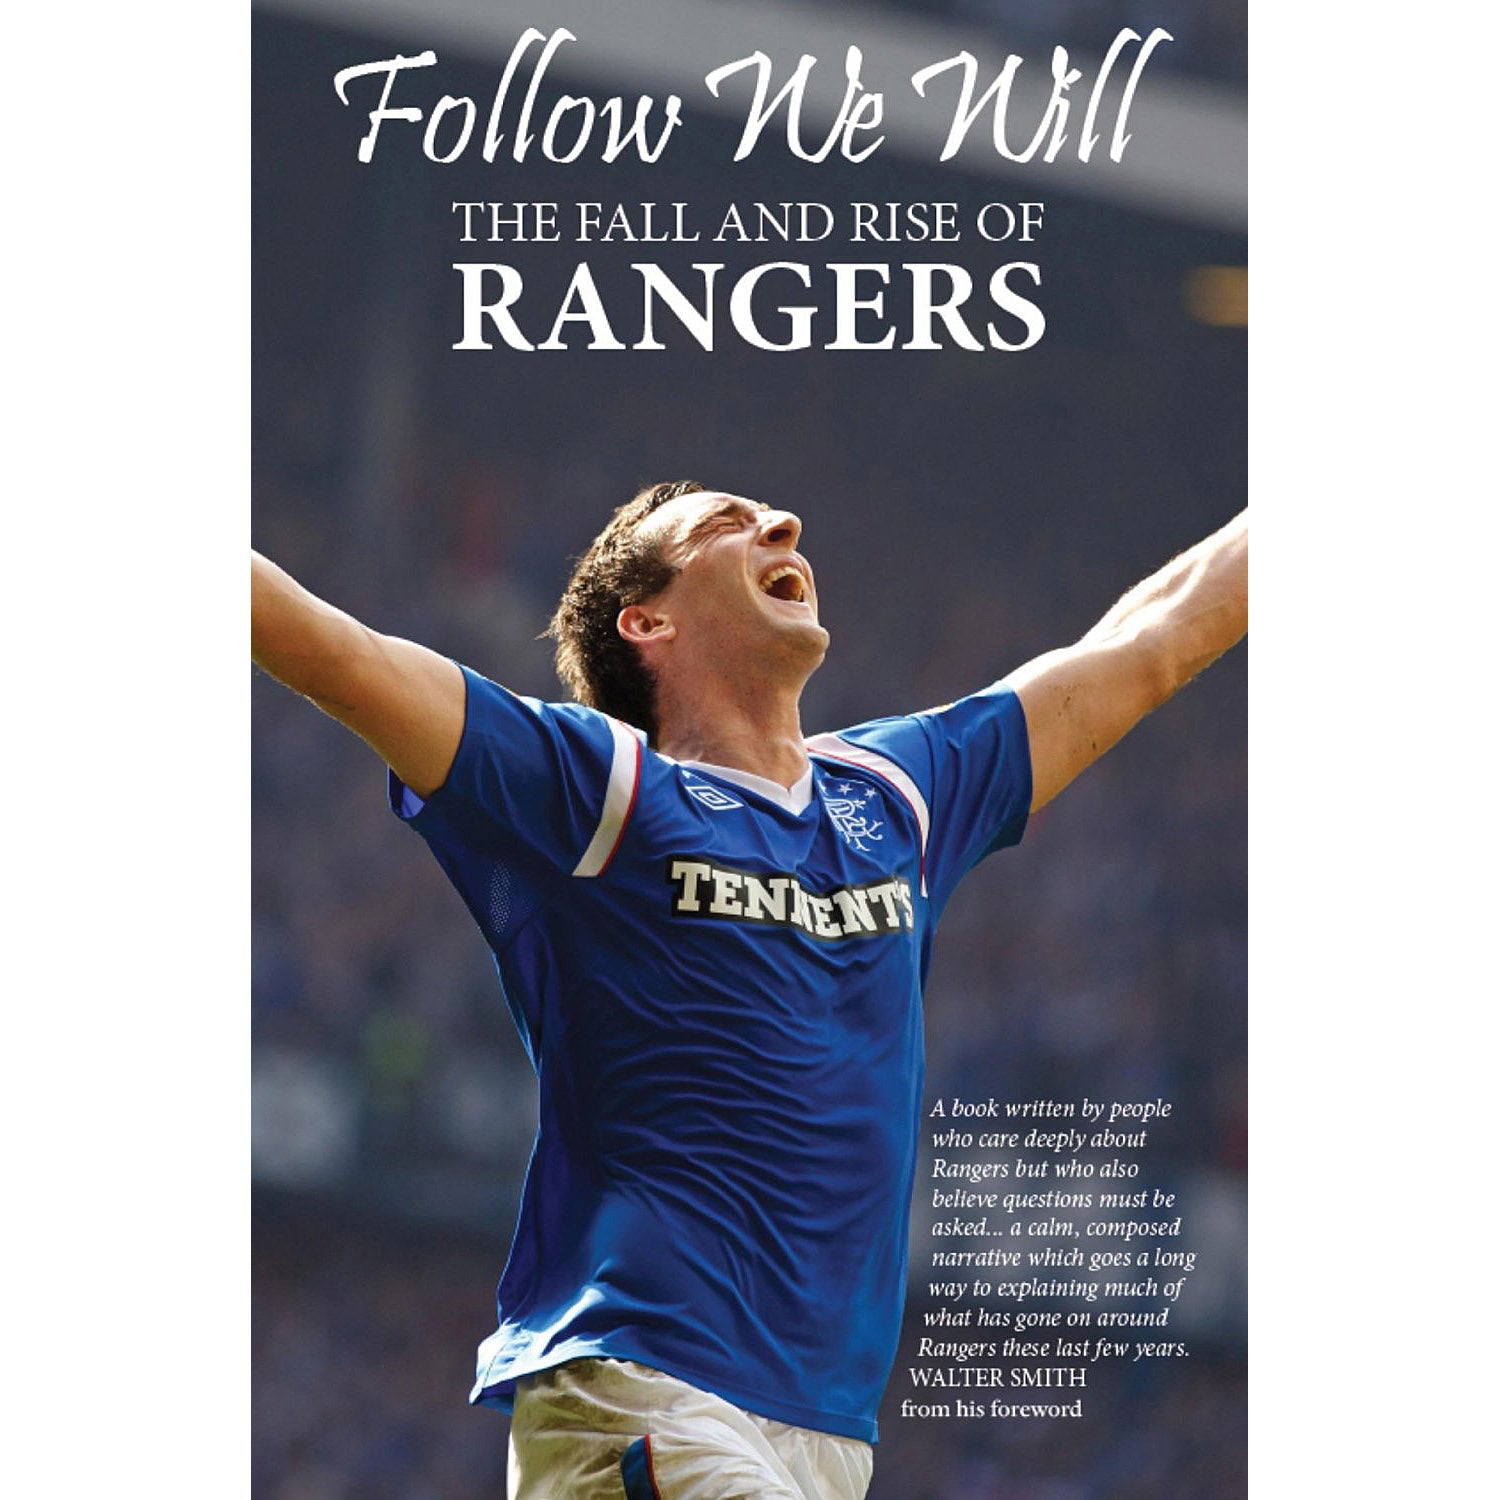 Follow We Will – The Fall and Rise of Rangers